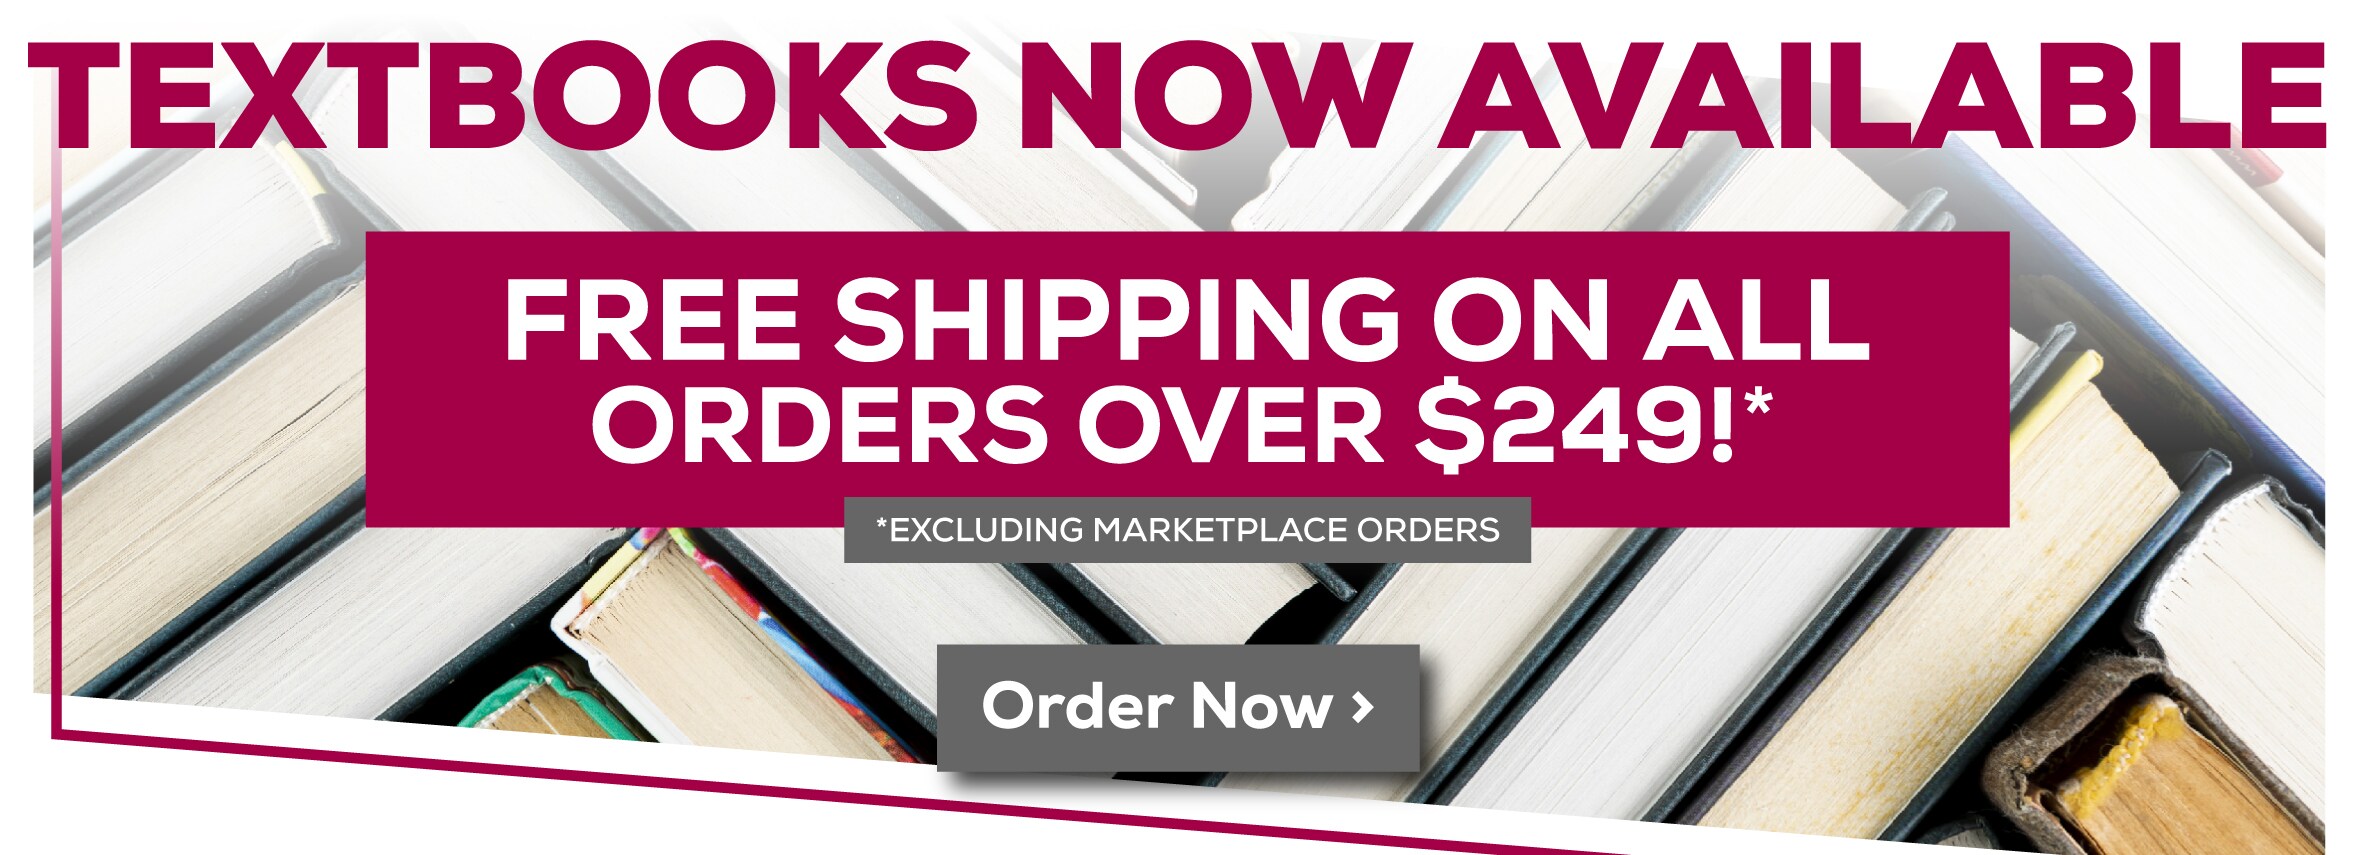 Textbooks Now Available. Free shipping on all orders over $249. Excluding marketplace orders. Order now!